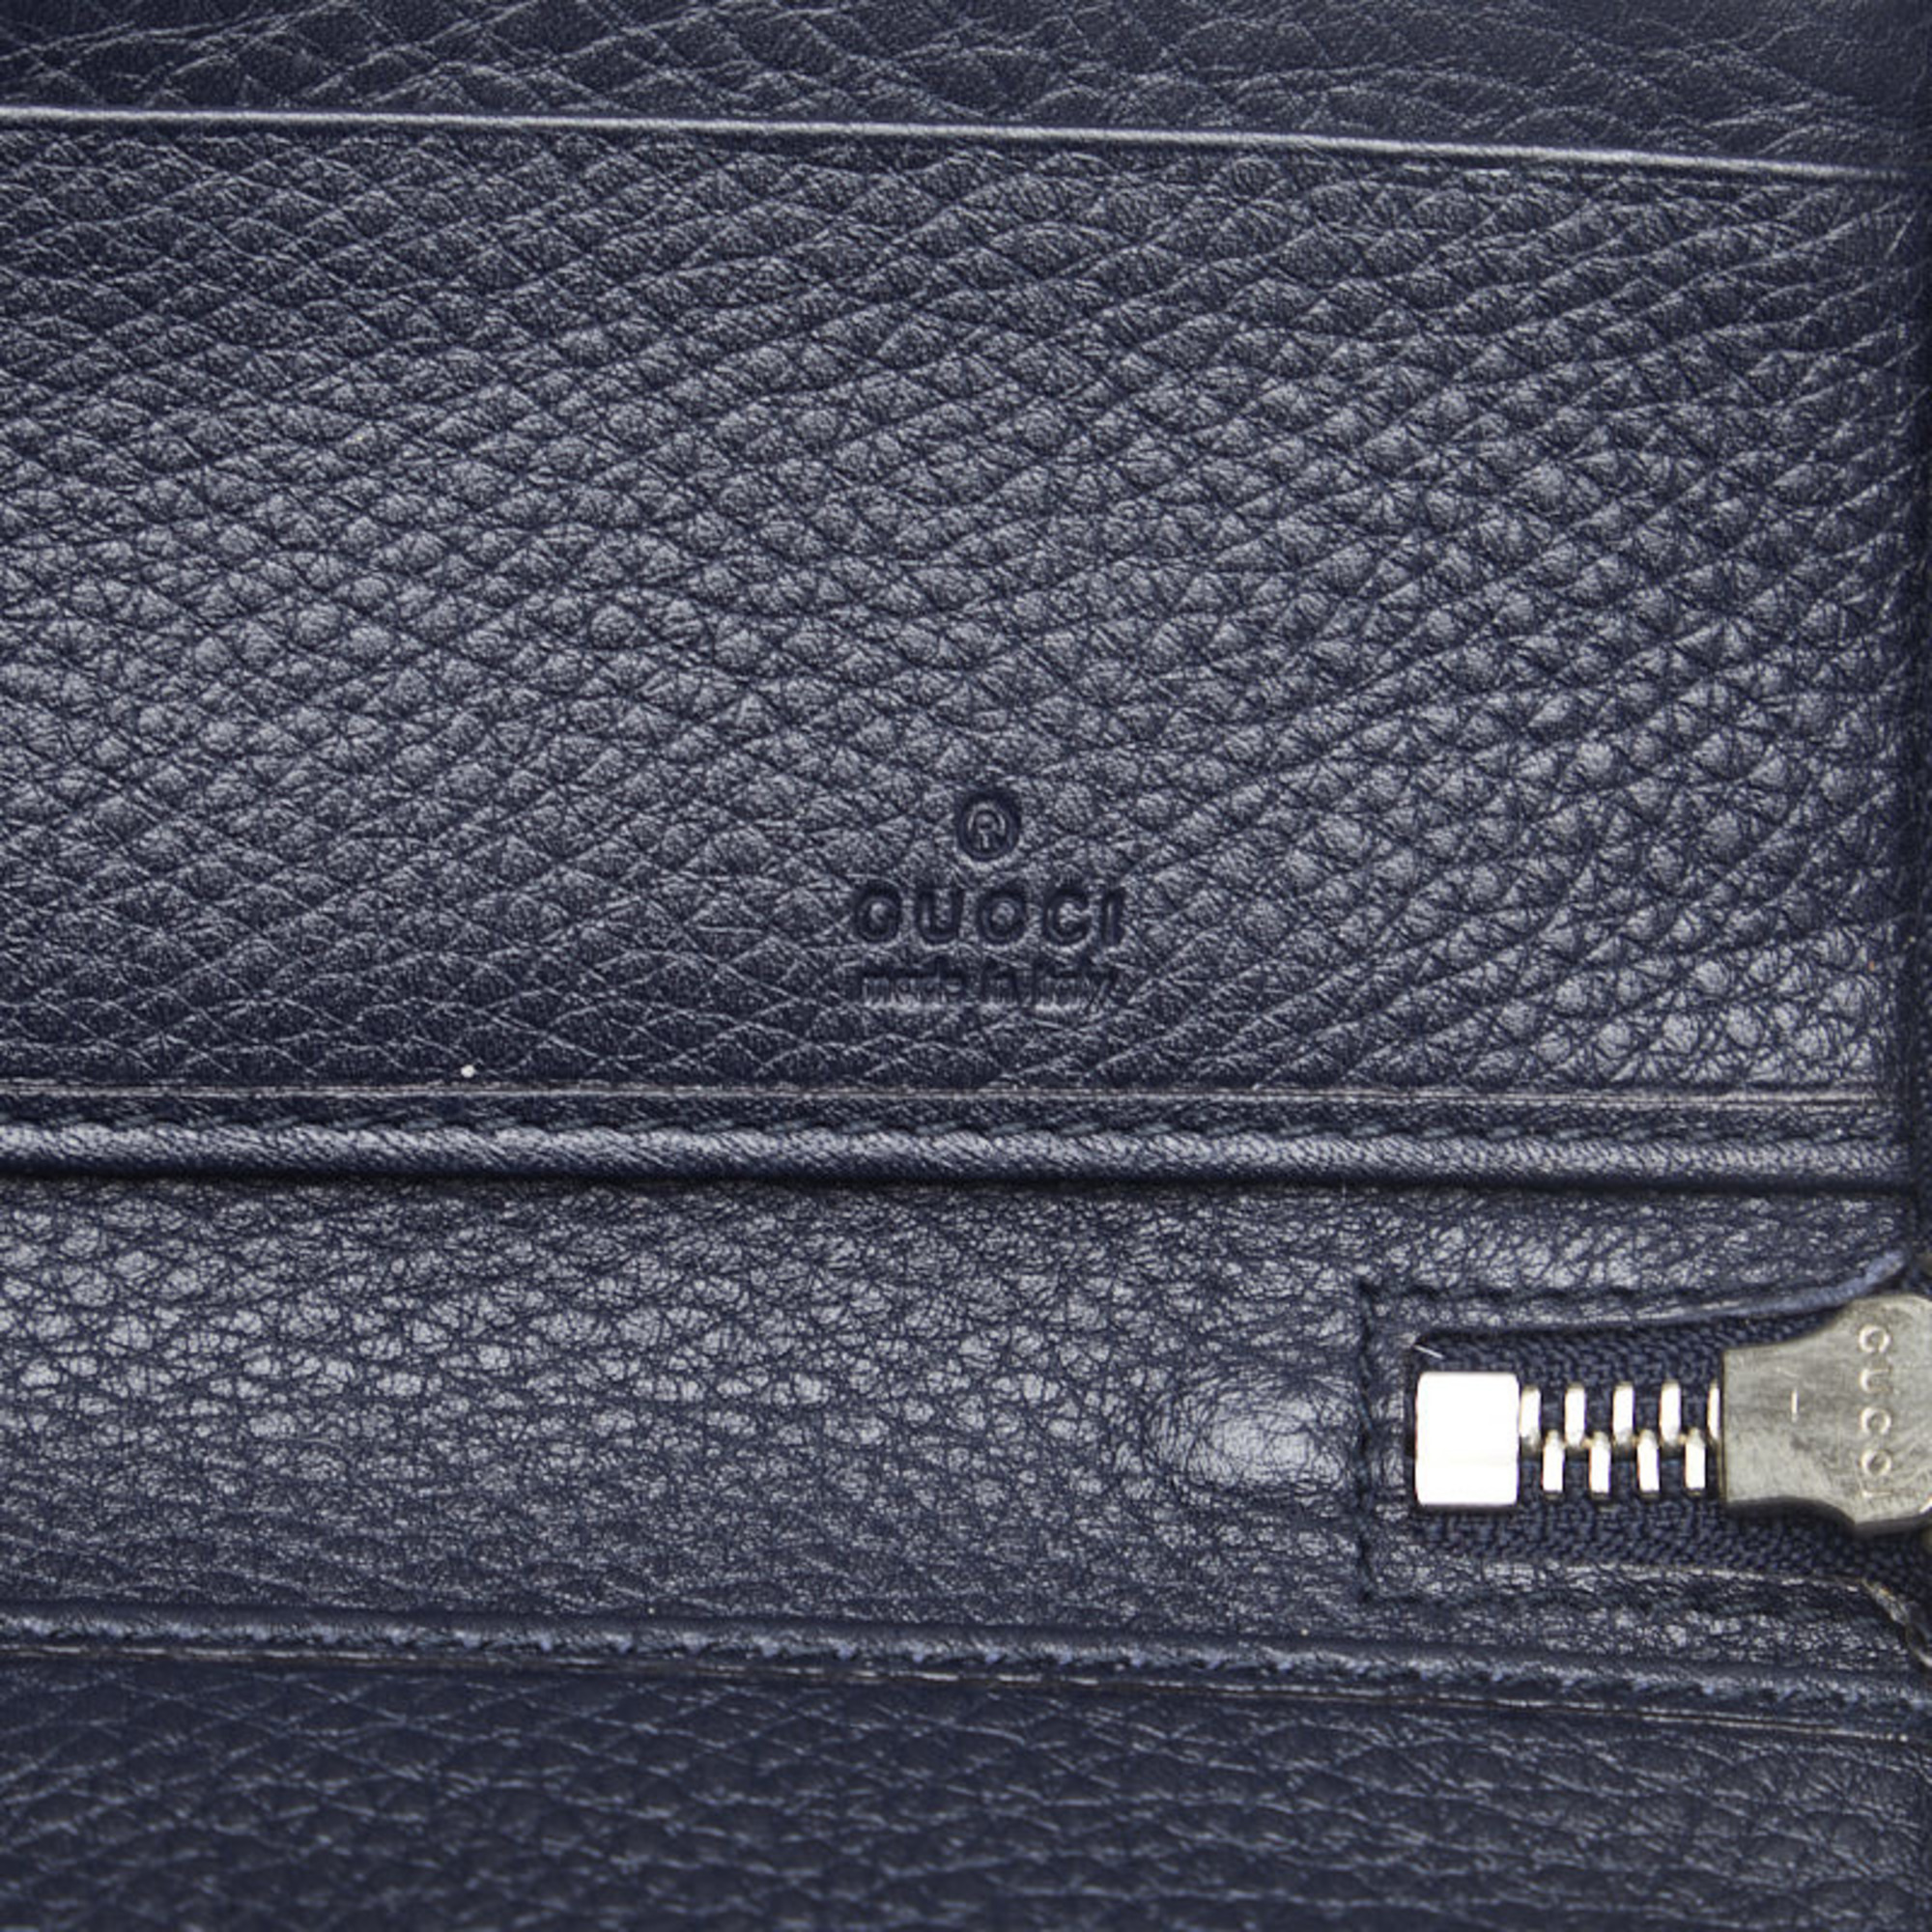 Gucci Interlocking G L-shaped long wallet 308787 Navy Leather Women's GUCCI